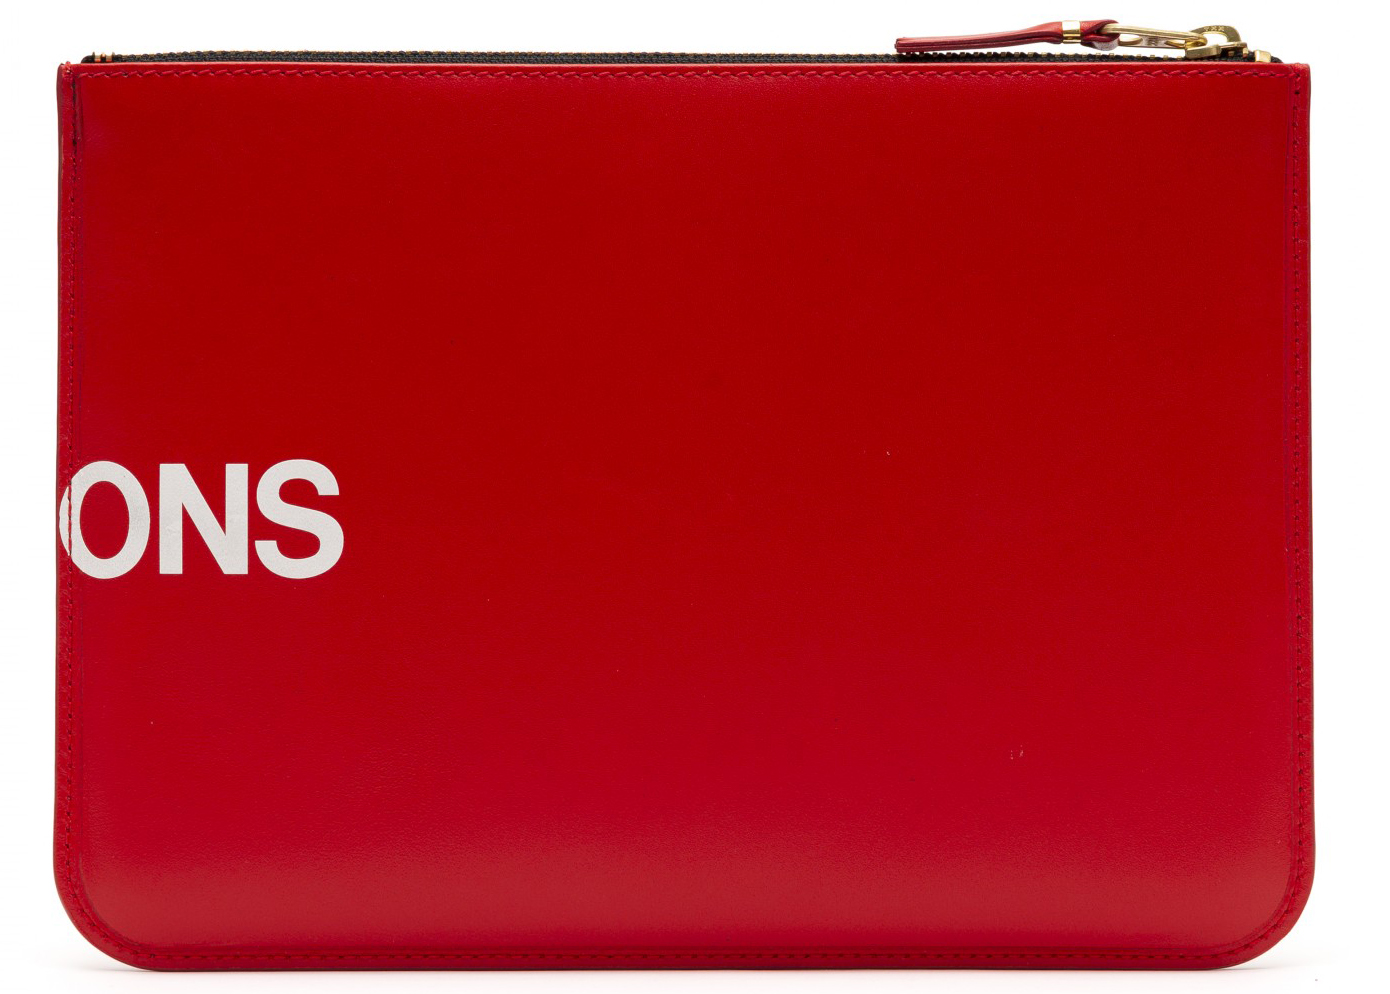 Comme des Garcons SA5100HL Huge Logo Wallet Red in Leather with ...